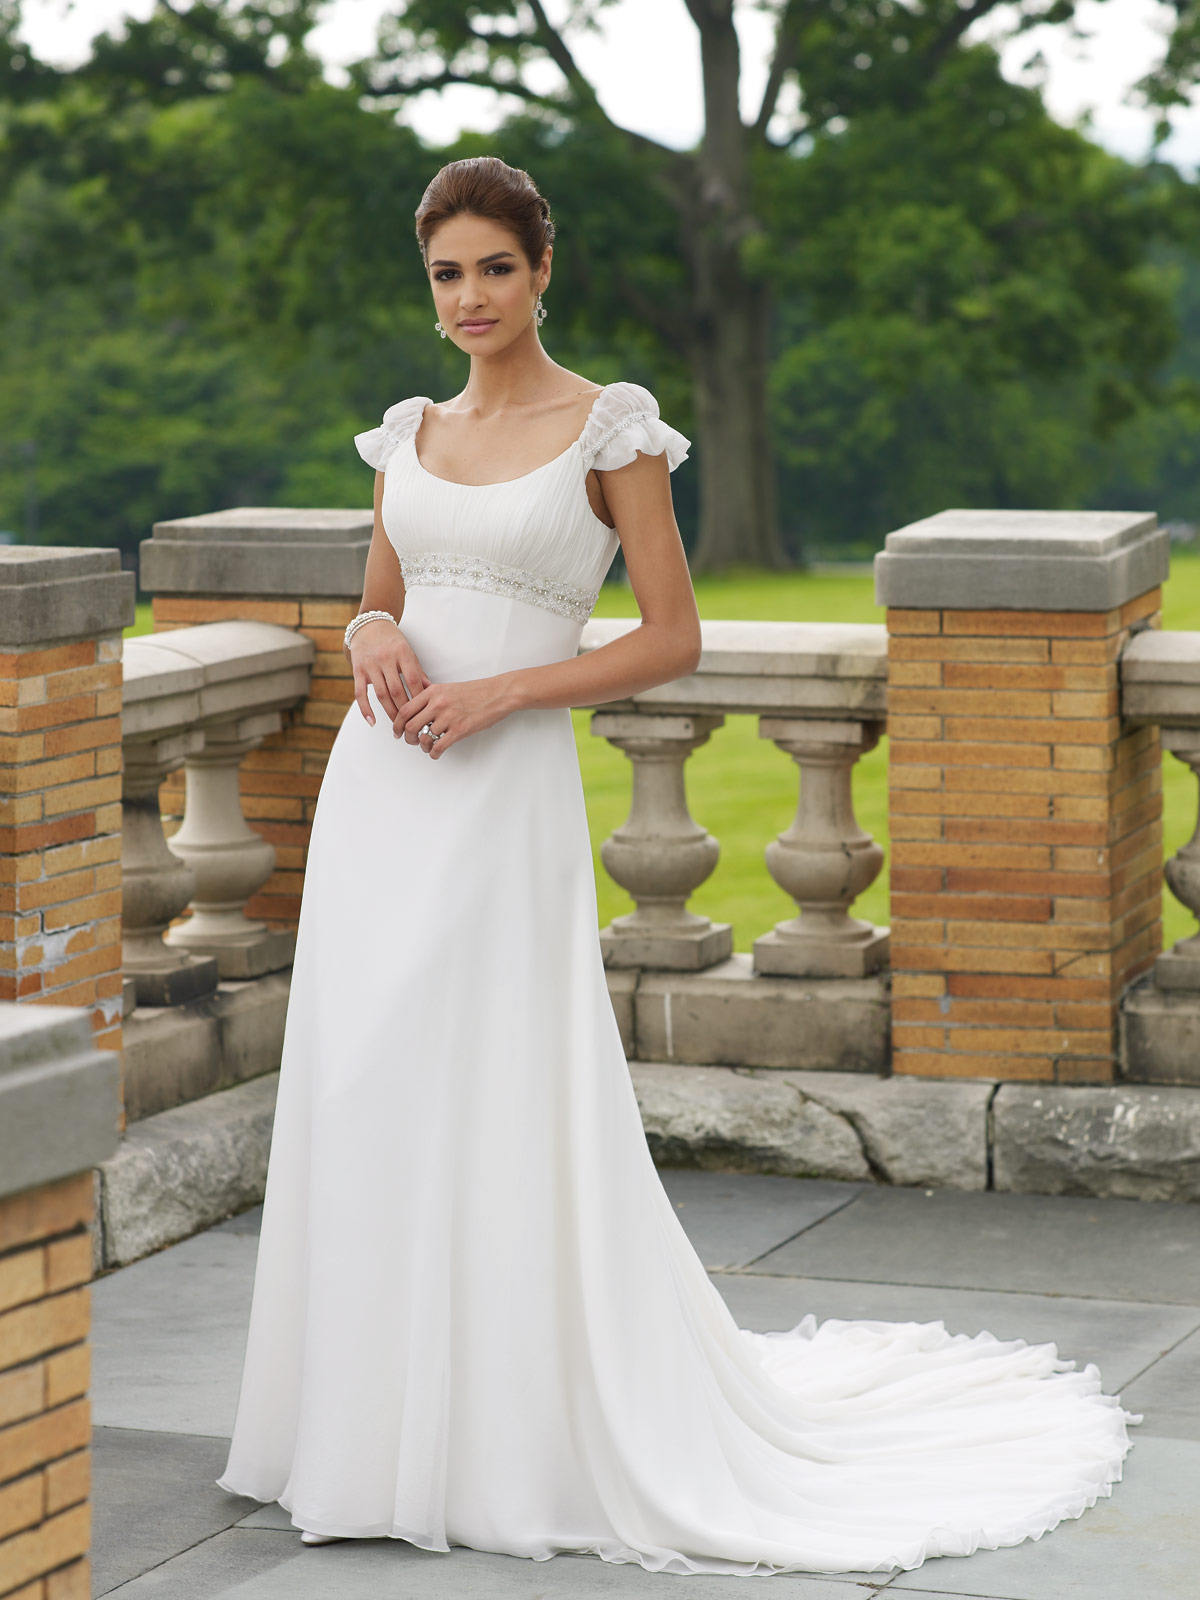 Simple About Wedding  the dress Designers, Beautiful Wedding Dress, Gowns Bridal